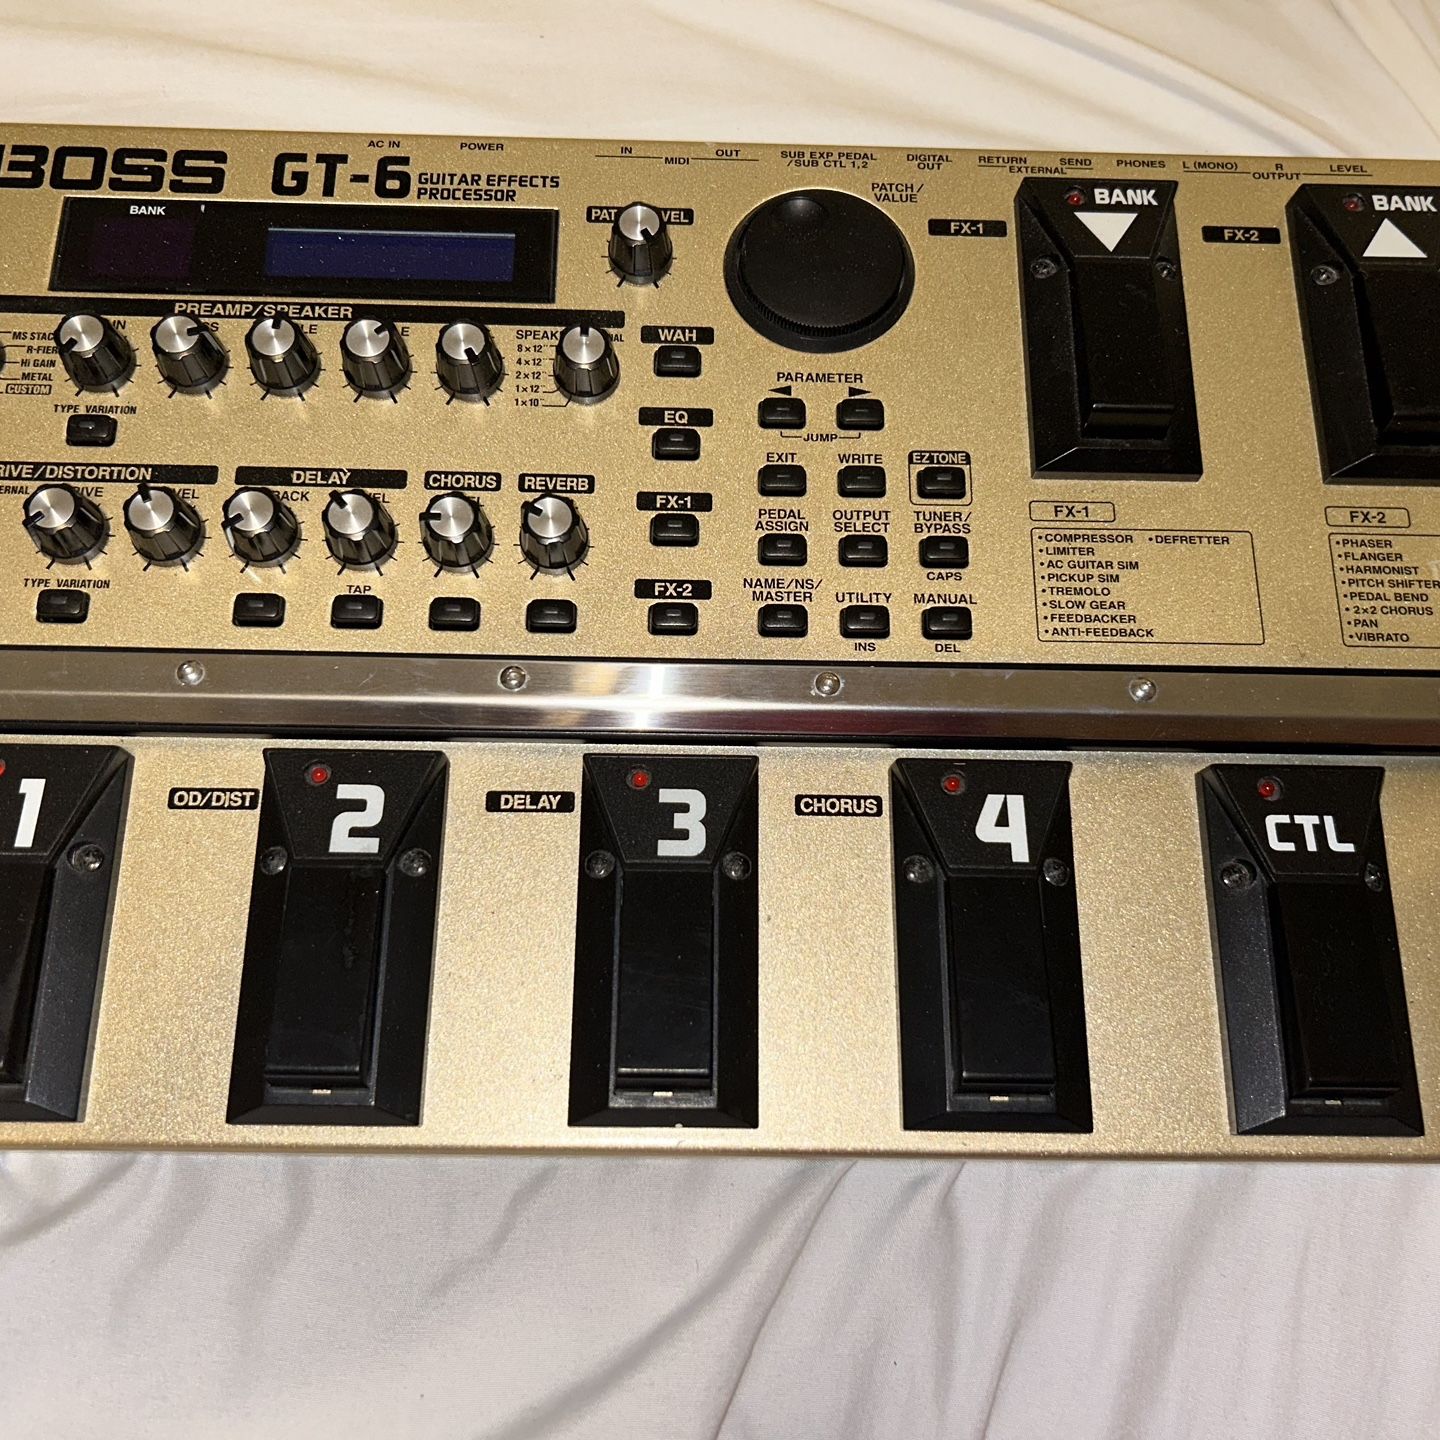 BOSS GT-6 Guitar Effects Processor for Sale in Donna, TX - OfferUp